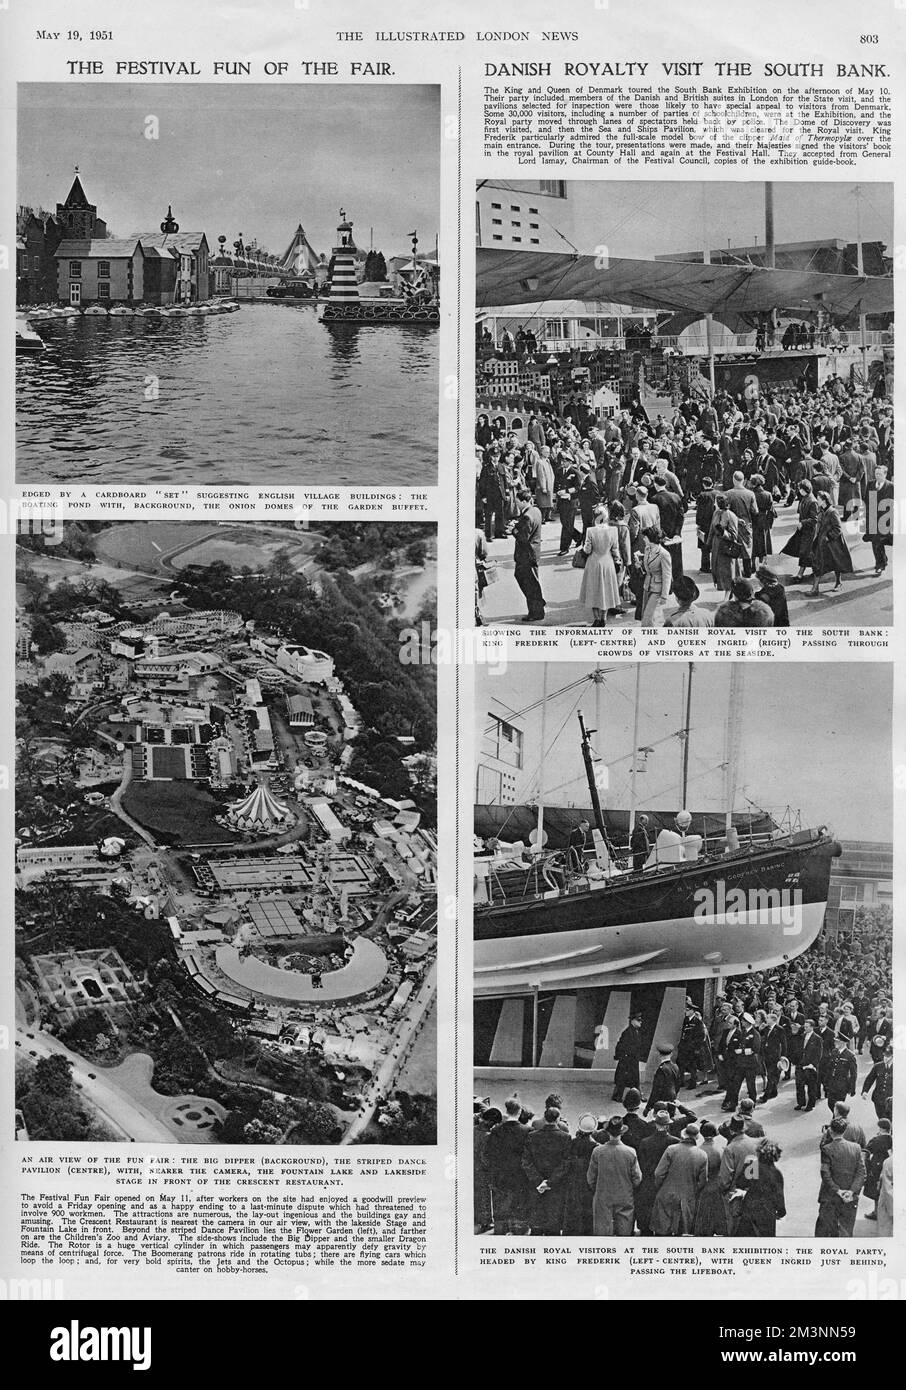 Views of the Festival of Britain (South Bank) and Fun Fair (Battersea).  Top left is the boating pond with a cardboard 'set' suggesting English village buildings.  Bottom left is an aerial view of the Fun Fair, with big dipper in the background, striped dance pavilion in the centre, fountain lake and lakeside stage in front of the Crescent Restaurant.  Top right shows an informal visit to the South Bank by the Danish royal family, with King Frederik IX and Queen Ingrid walking through crowds of visitors at the 'seaside' venue.  Bottom right shows the royal party near the lifeboat (RNLB Sir God Stock Photo